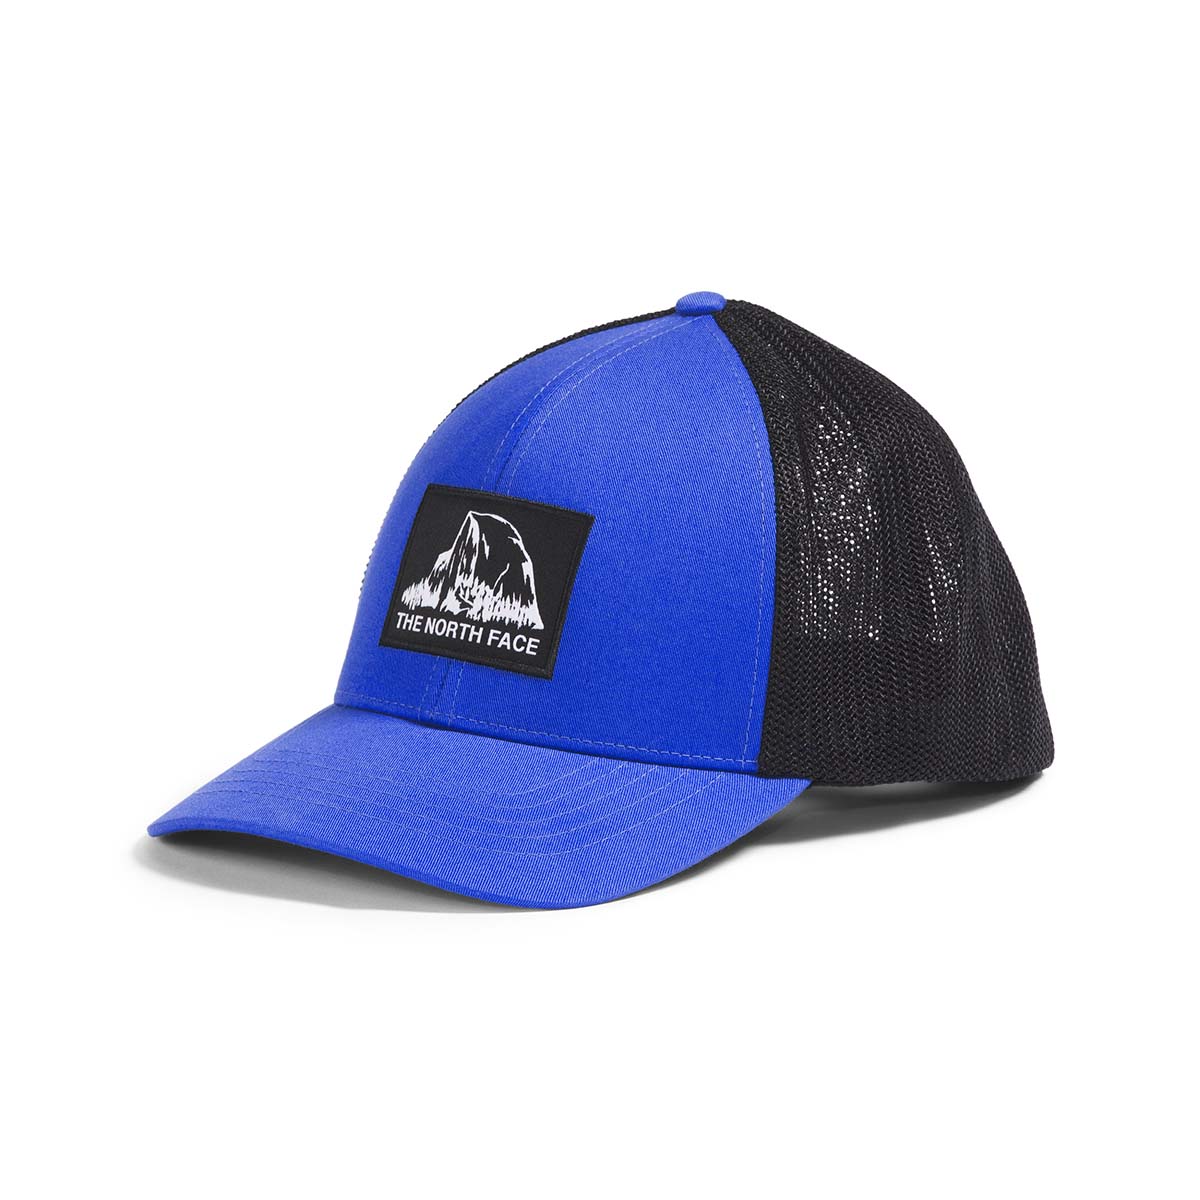 The North Face Truckee Hat